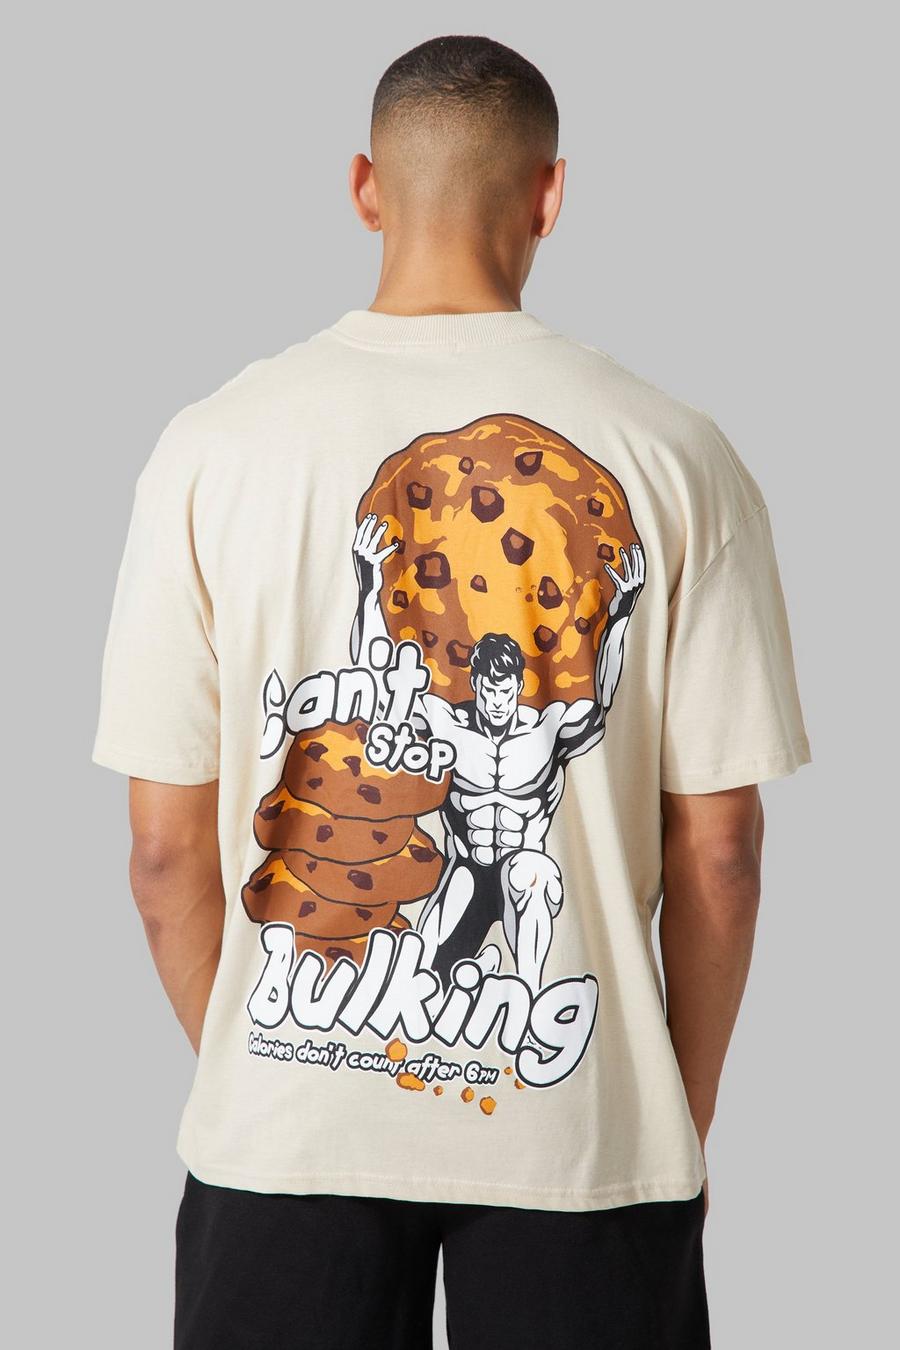 Sand Man Active Oversized Cant Stop Bulking T-shirt